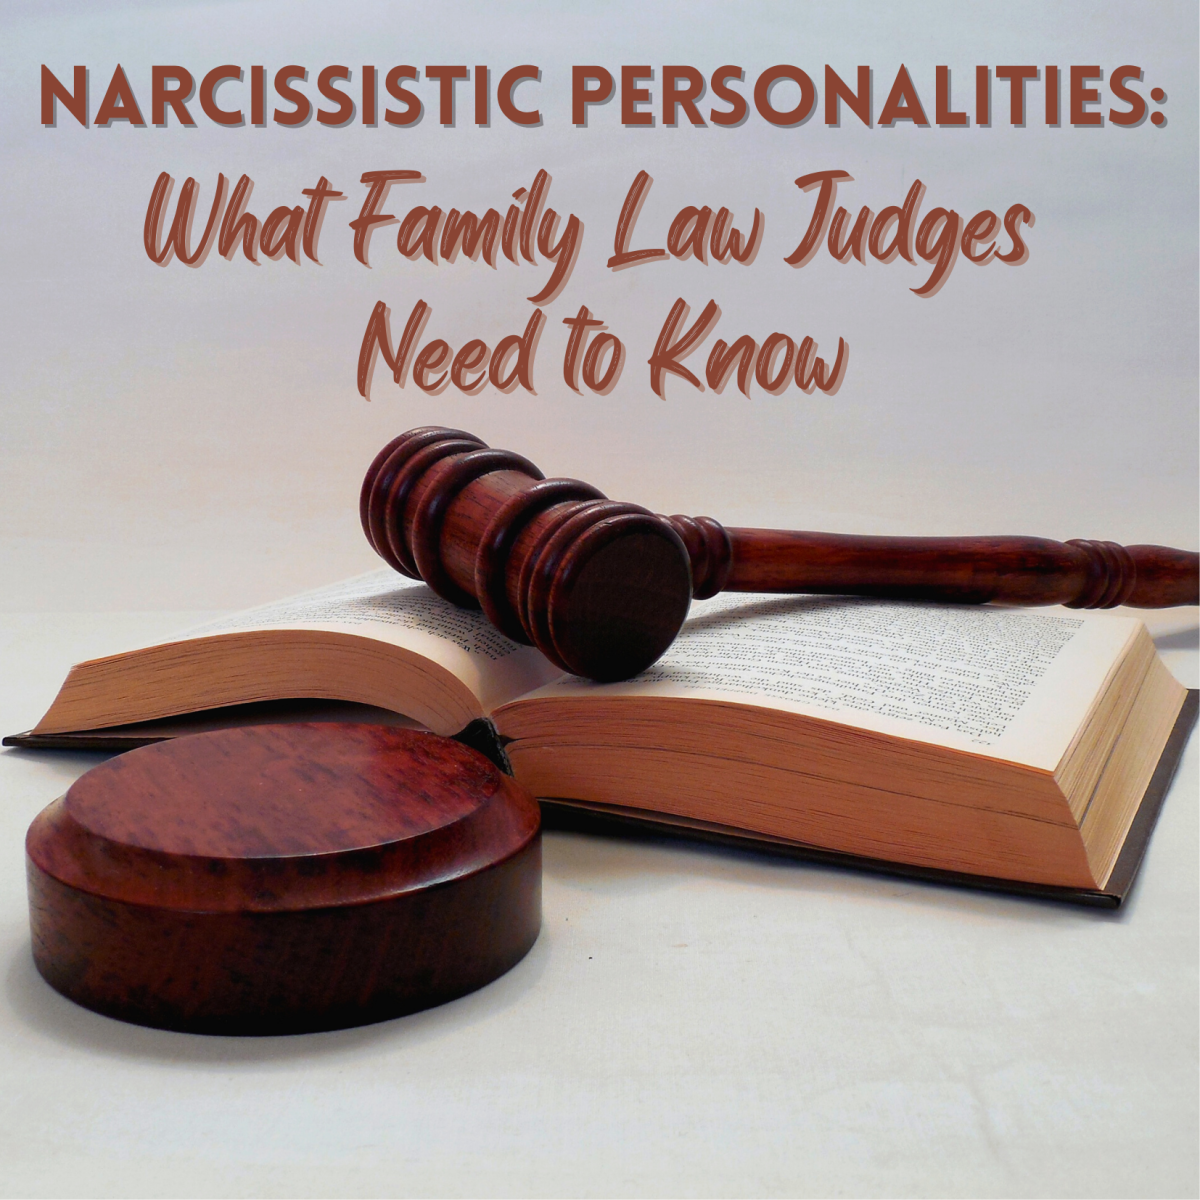 How judges can recognize and deal with NPDs in custody cases